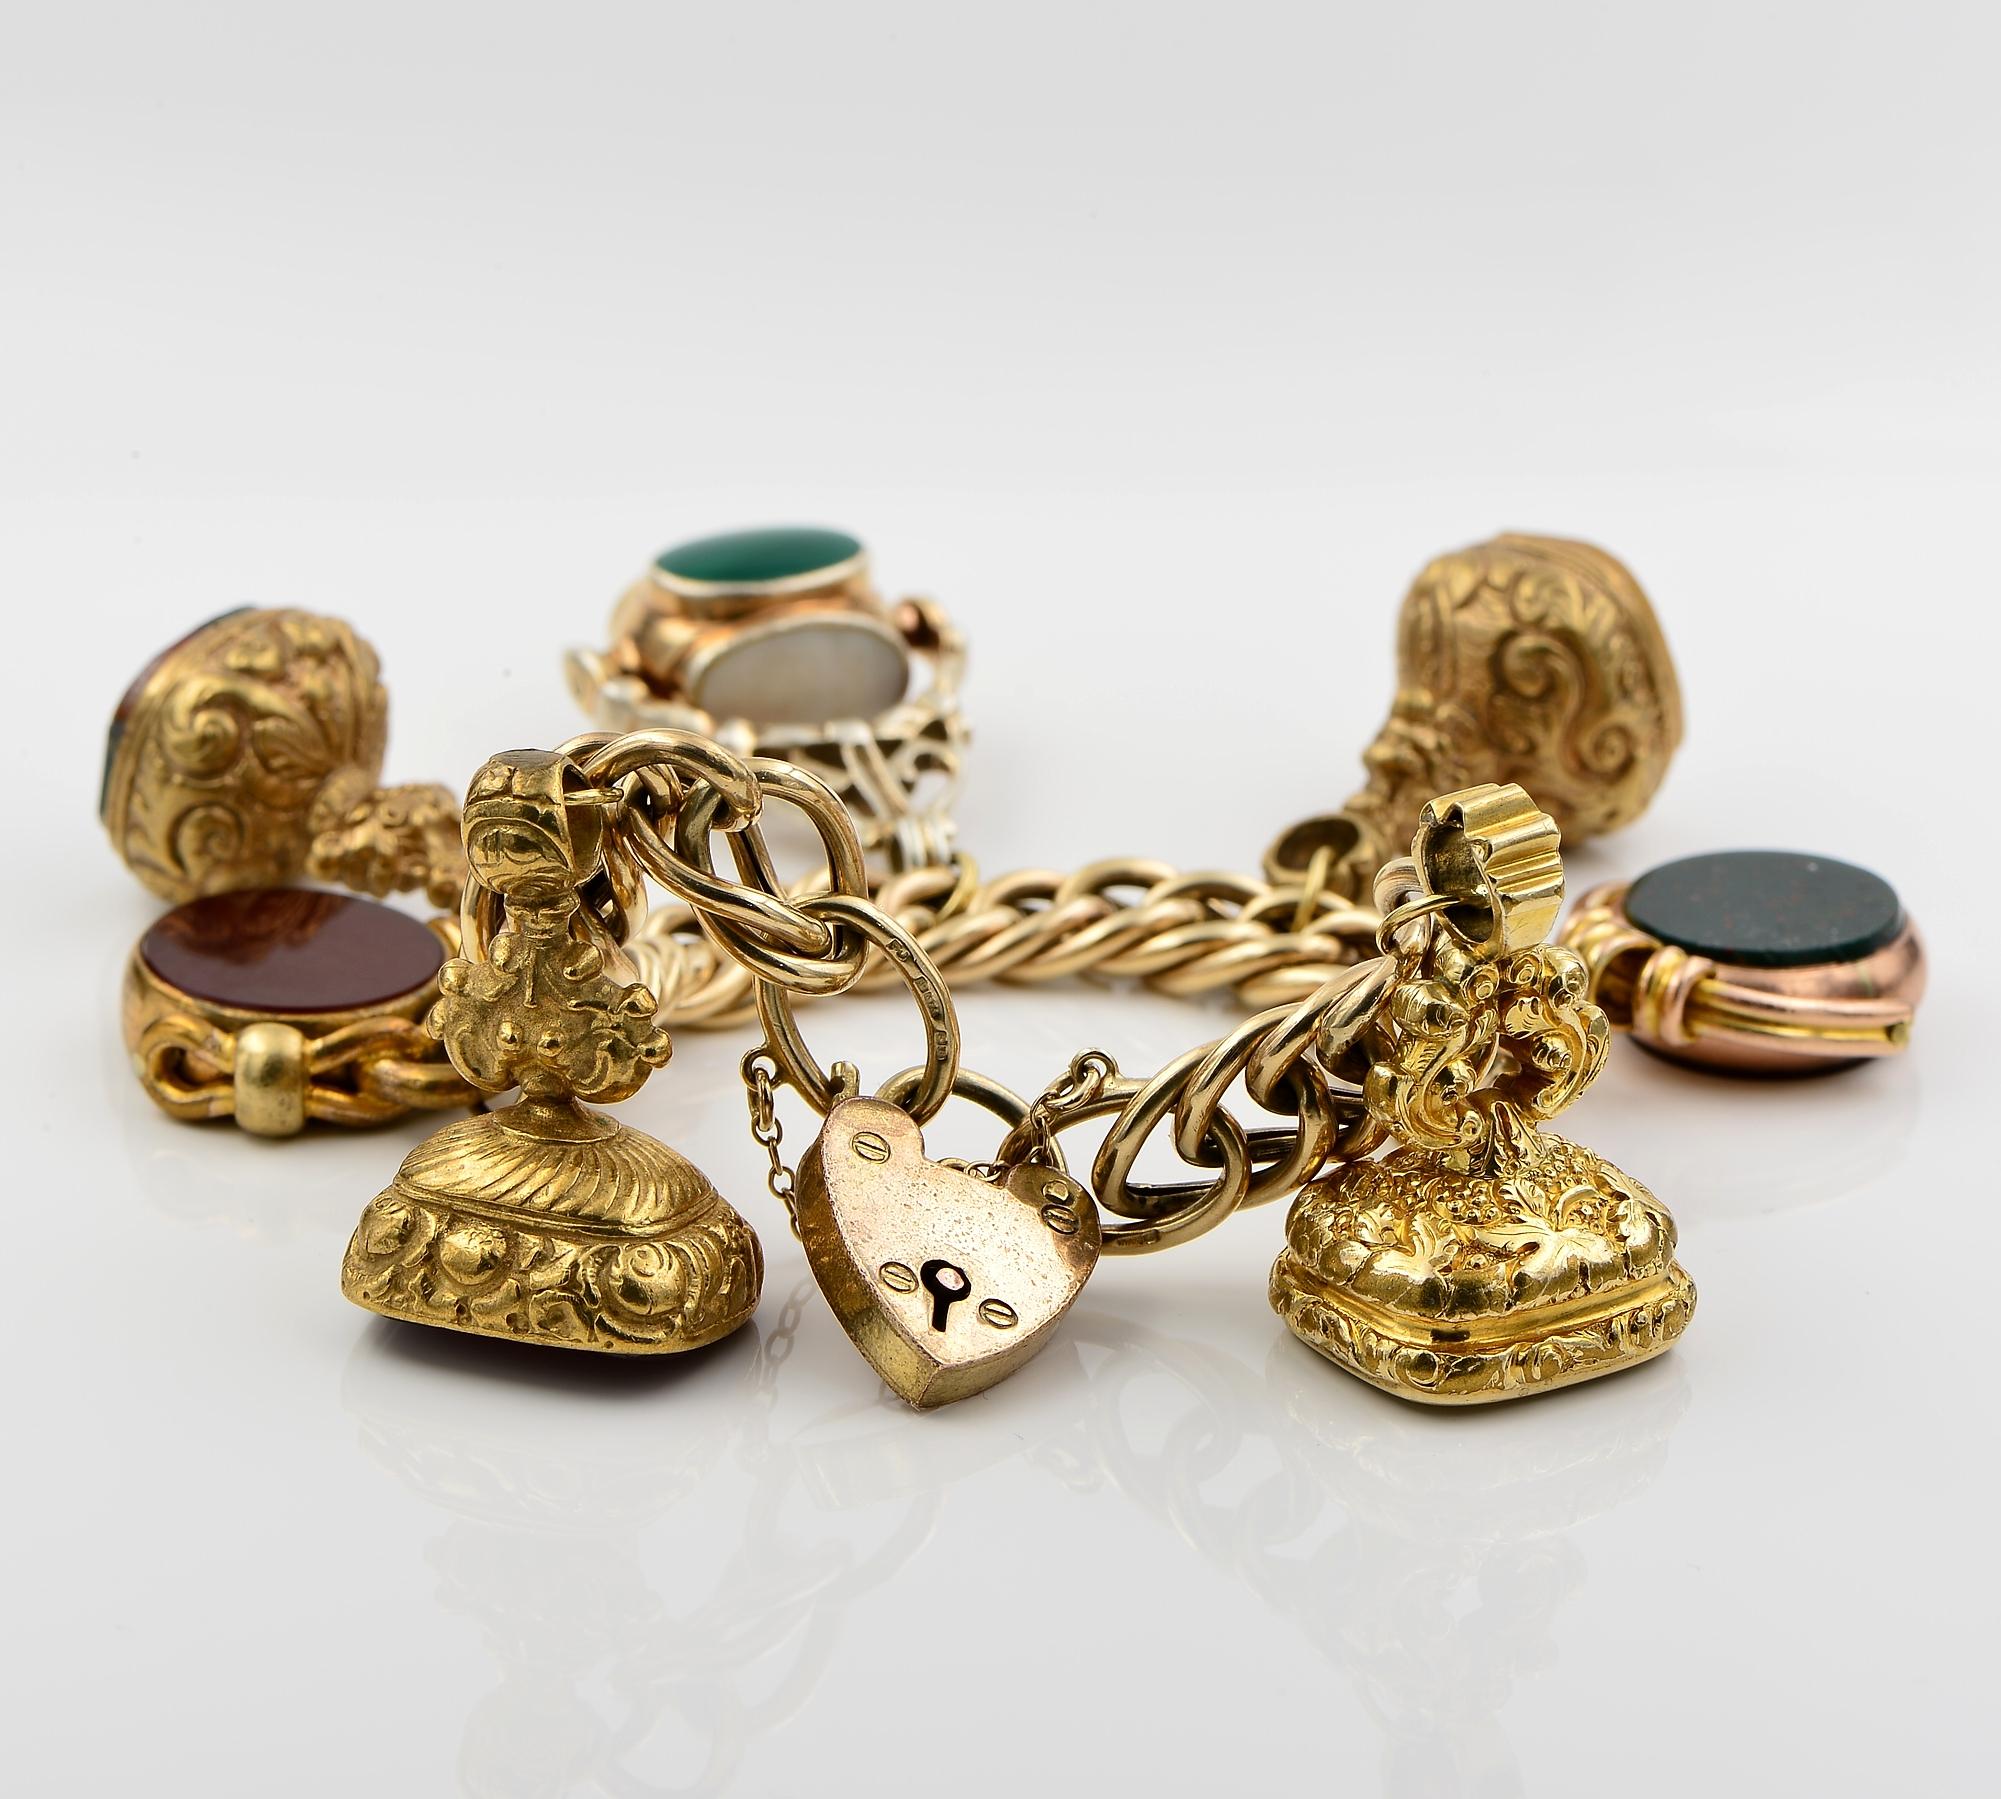 Collected with Love
This very pretty English vintage bracelet, has been loaded with a collection of antique, interesting and unique hard stone Pinchbeck or as called cased gold fobs, one in silver and one heart padlock made of Pinchbeck, all large